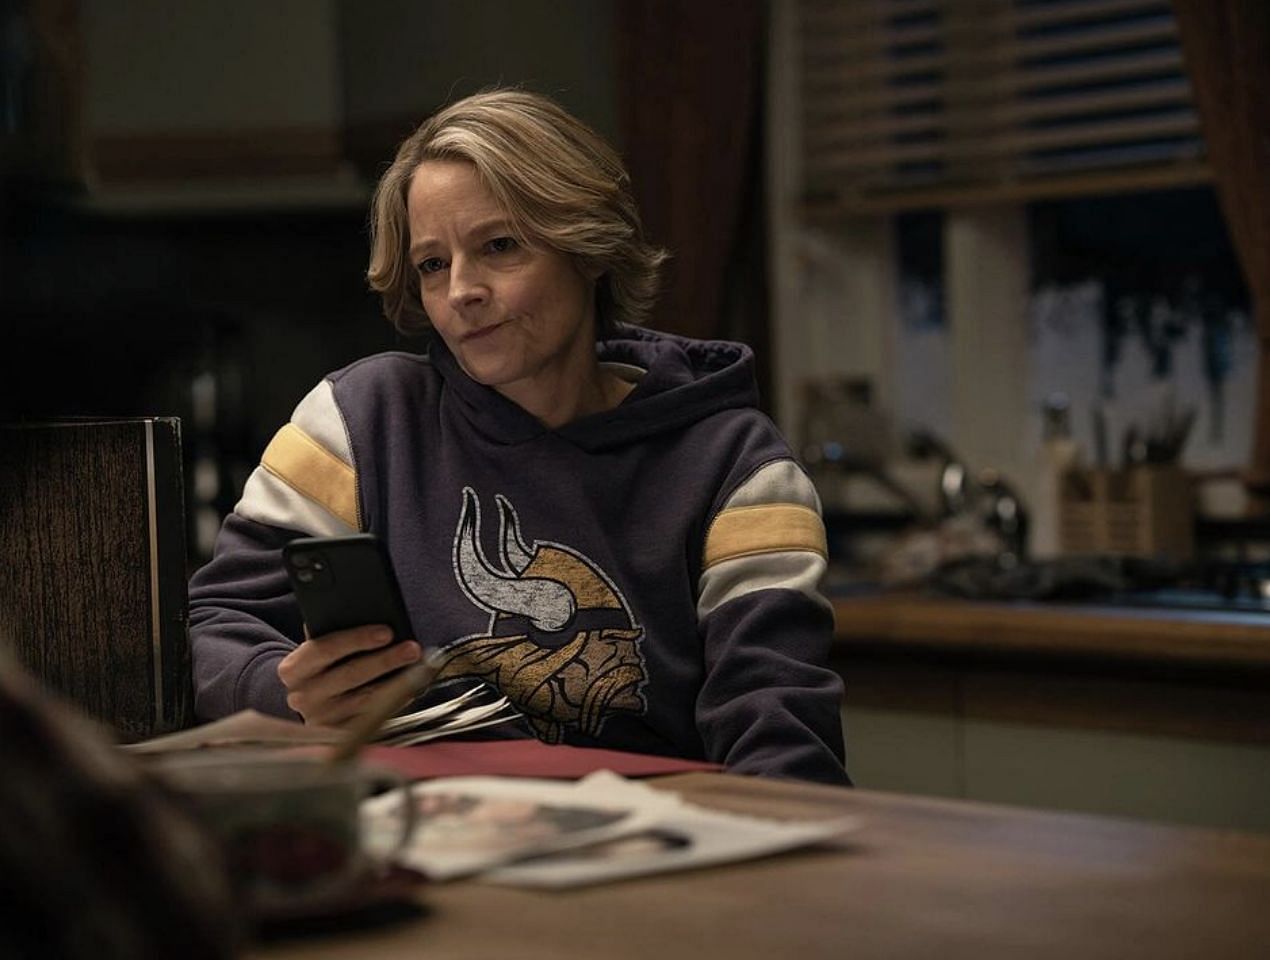 A still of Jodie Foster from True Detective. (Image via Instagram/@truedetective)